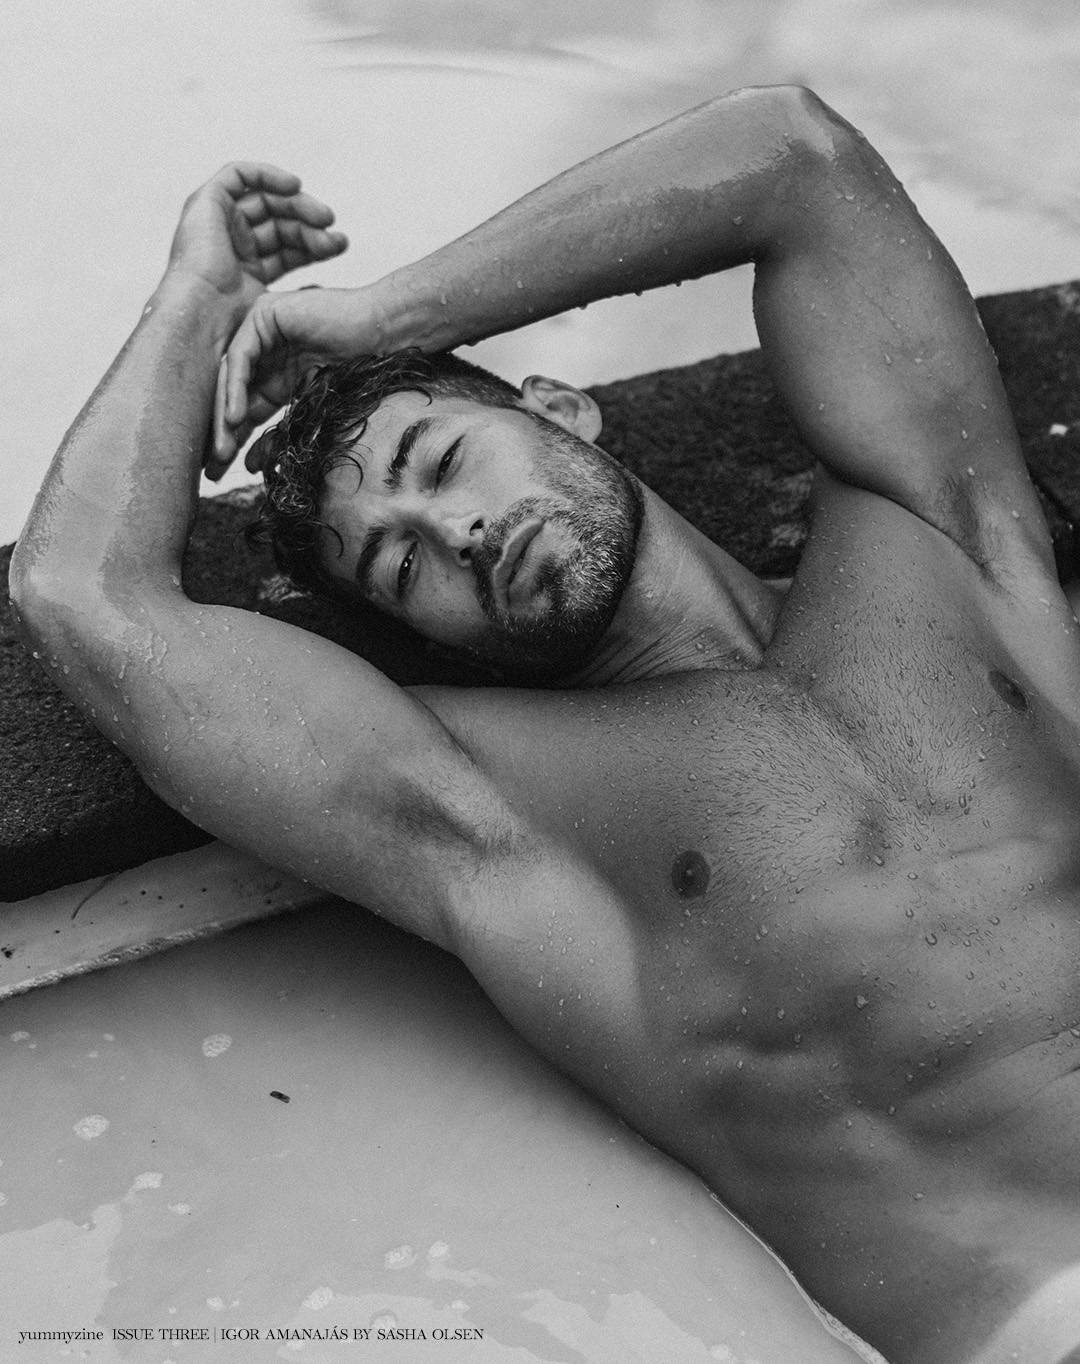 Brazilian-Portuguese actor, model, and performer Igor Amanajás now living in Bali for his P.h.D pic